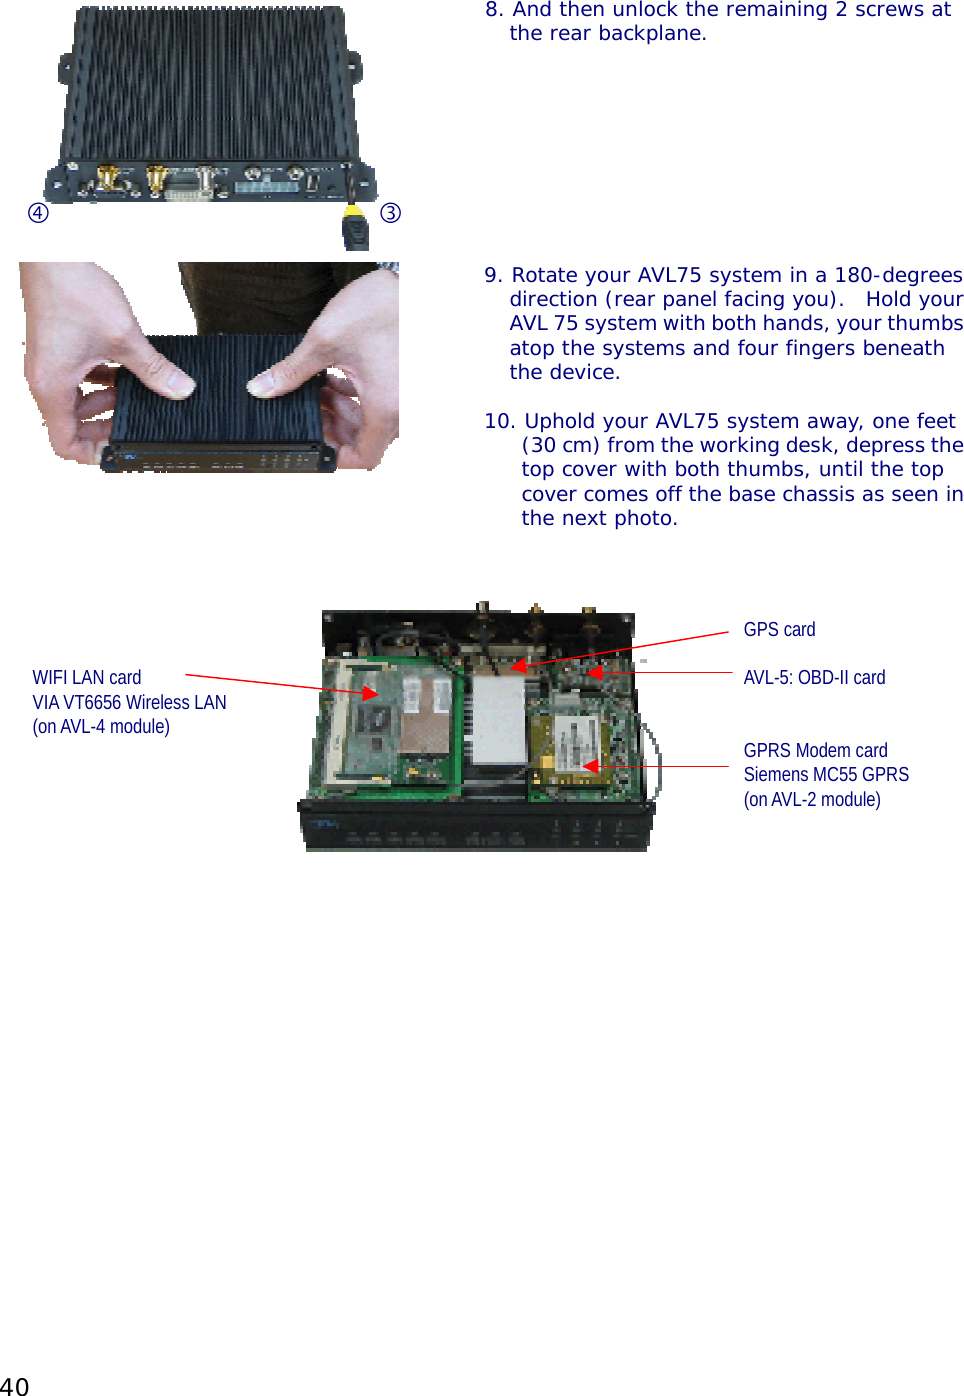 40   8. And then unlock the remaining 2 screws at the rear backplane.   9. Rotate your AVL75 system in a 180-degreesdirection (rear panel facing you).  Hold yourAVL 75 system with both hands, your thumbsatop the systems and four fingers beneath the device.  10. Uphold your AVL75 system away, one feet (30 cm) from the working desk, depress thetop cover with both thumbs, until the top cover comes off the base chassis as seen inthe next photo.            GPS card  WIFI LAN card        AVL-5: OBD-II card VIA VT6656 Wireless LAN (on AVL-4 module)         GPRS Modem card         Siemens MC55 GPRS       (on AVL-2 module)                         